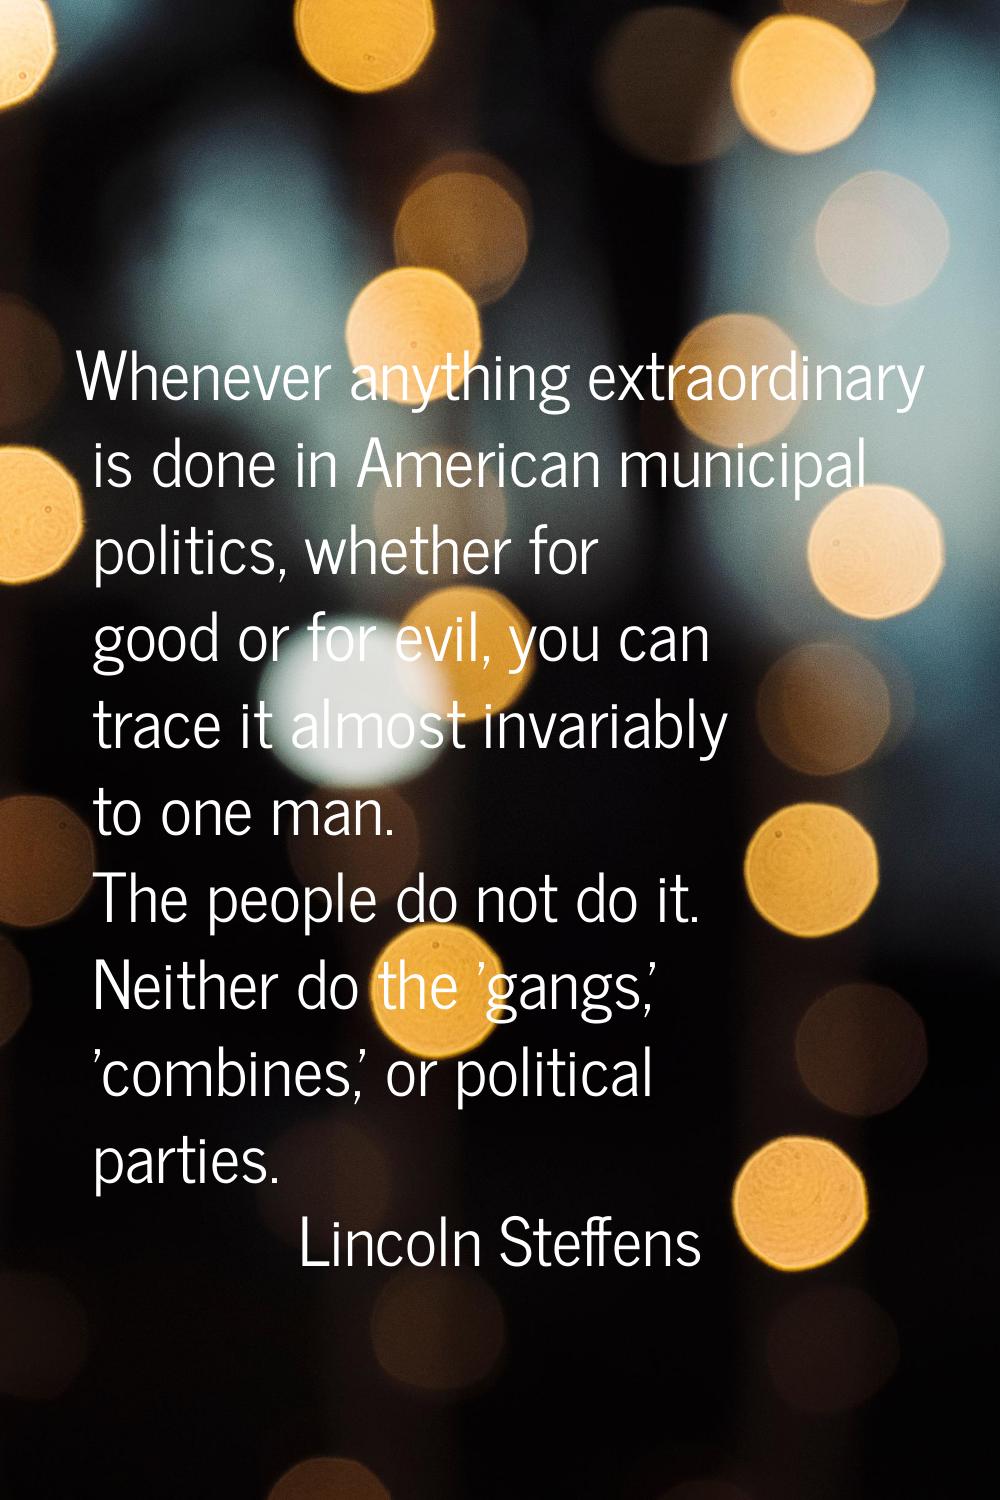 Whenever anything extraordinary is done in American municipal politics, whether for good or for evi